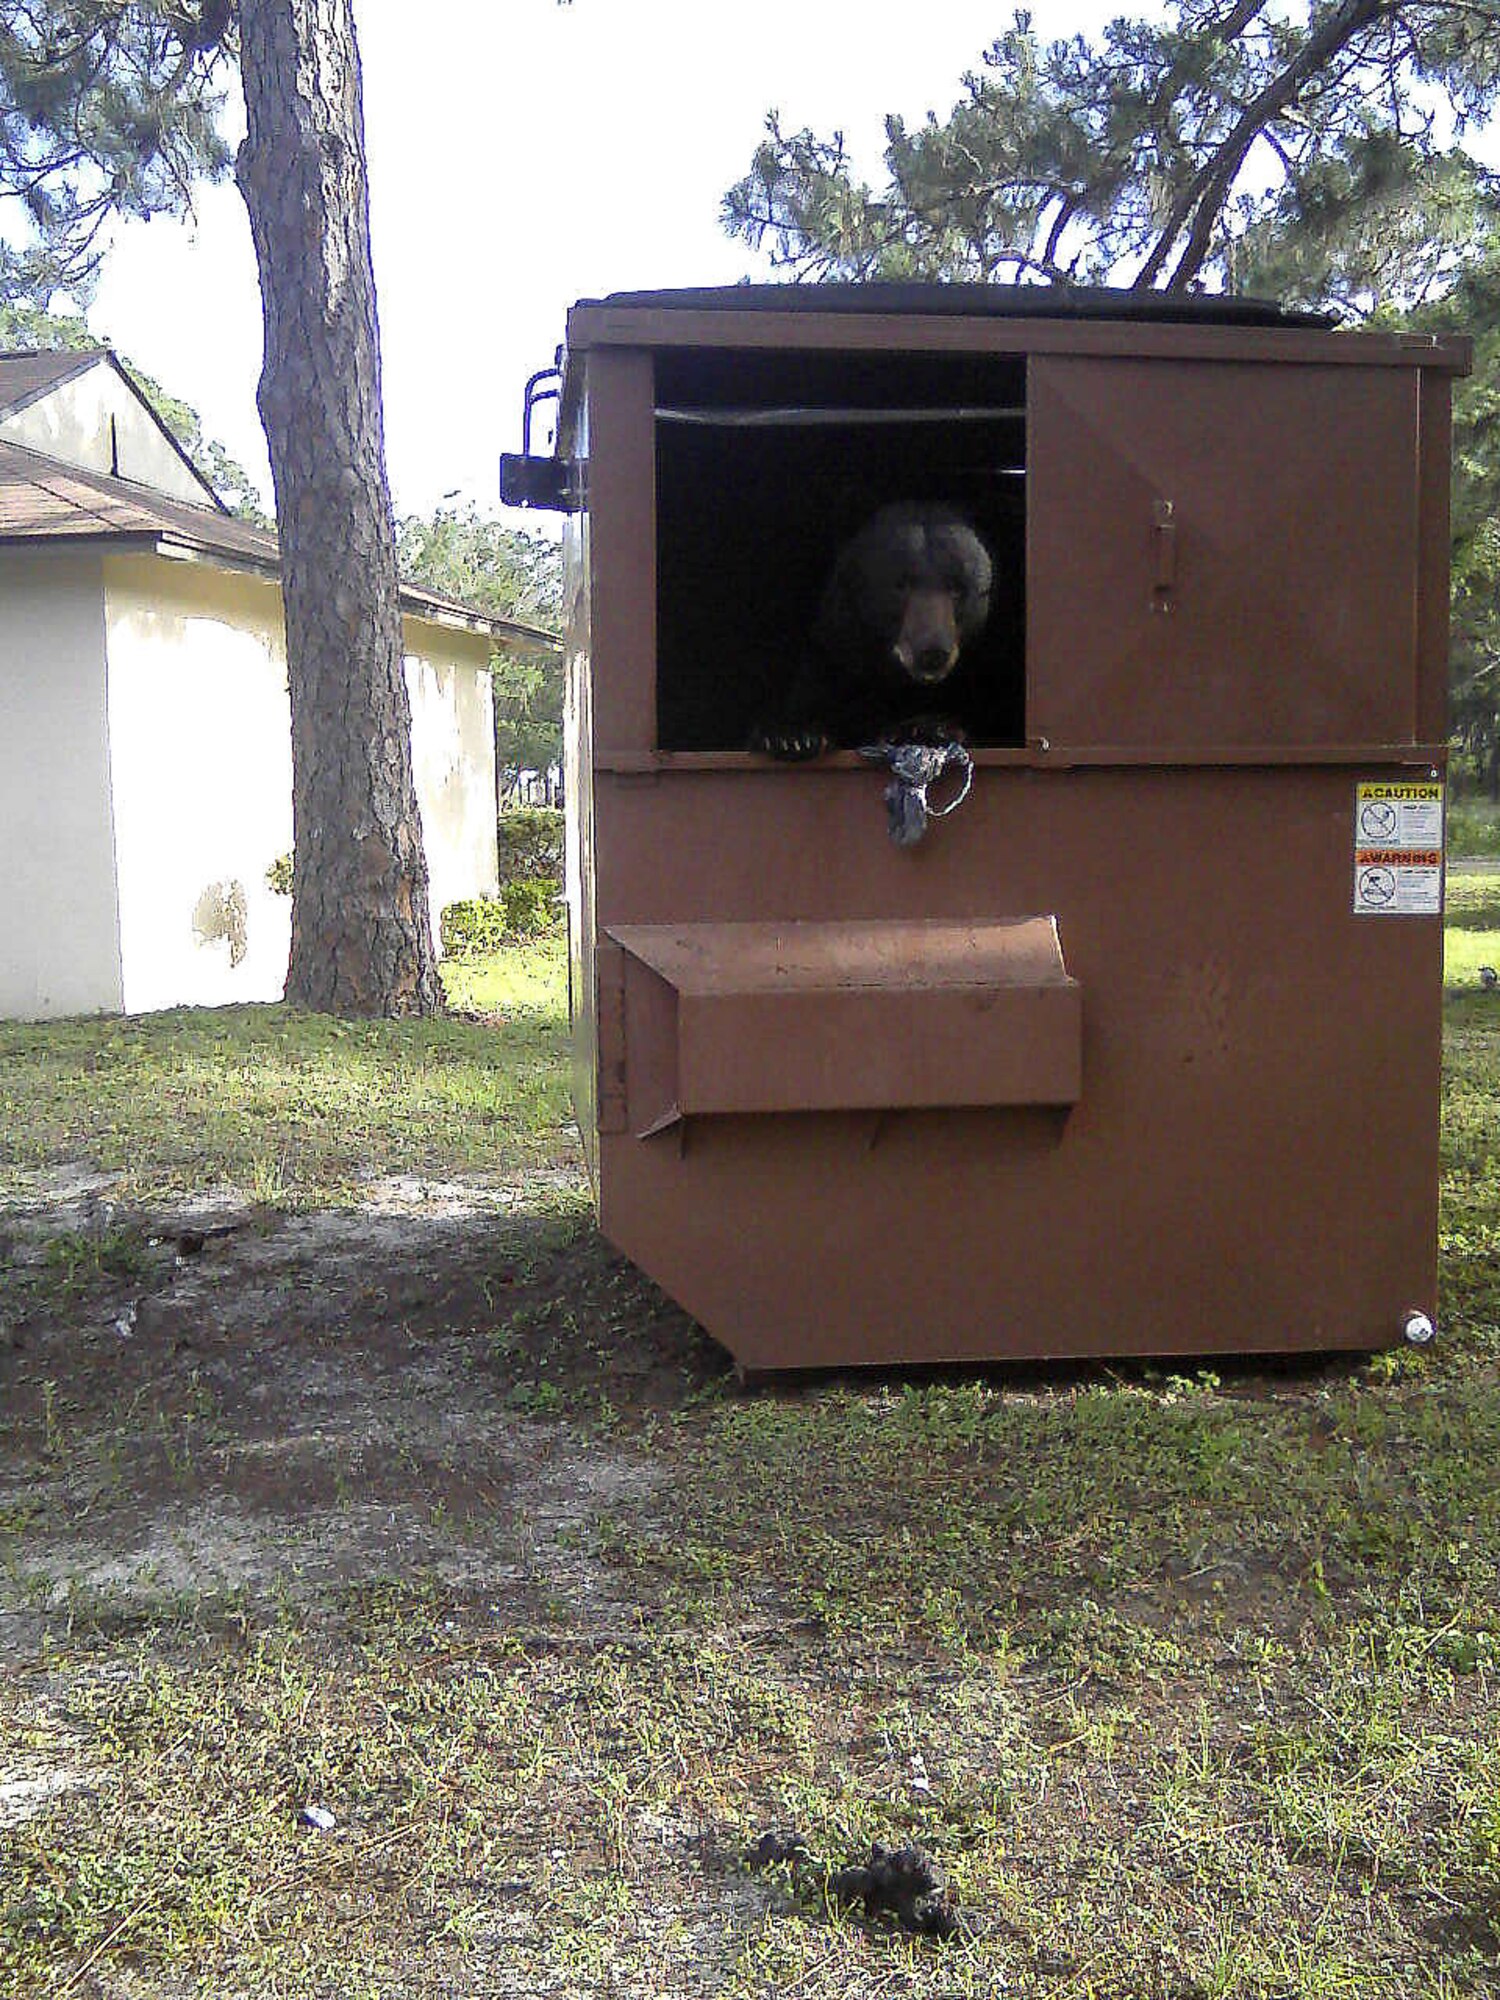 A bear peers out of a Tyndall dumpster. (Curiously photo)